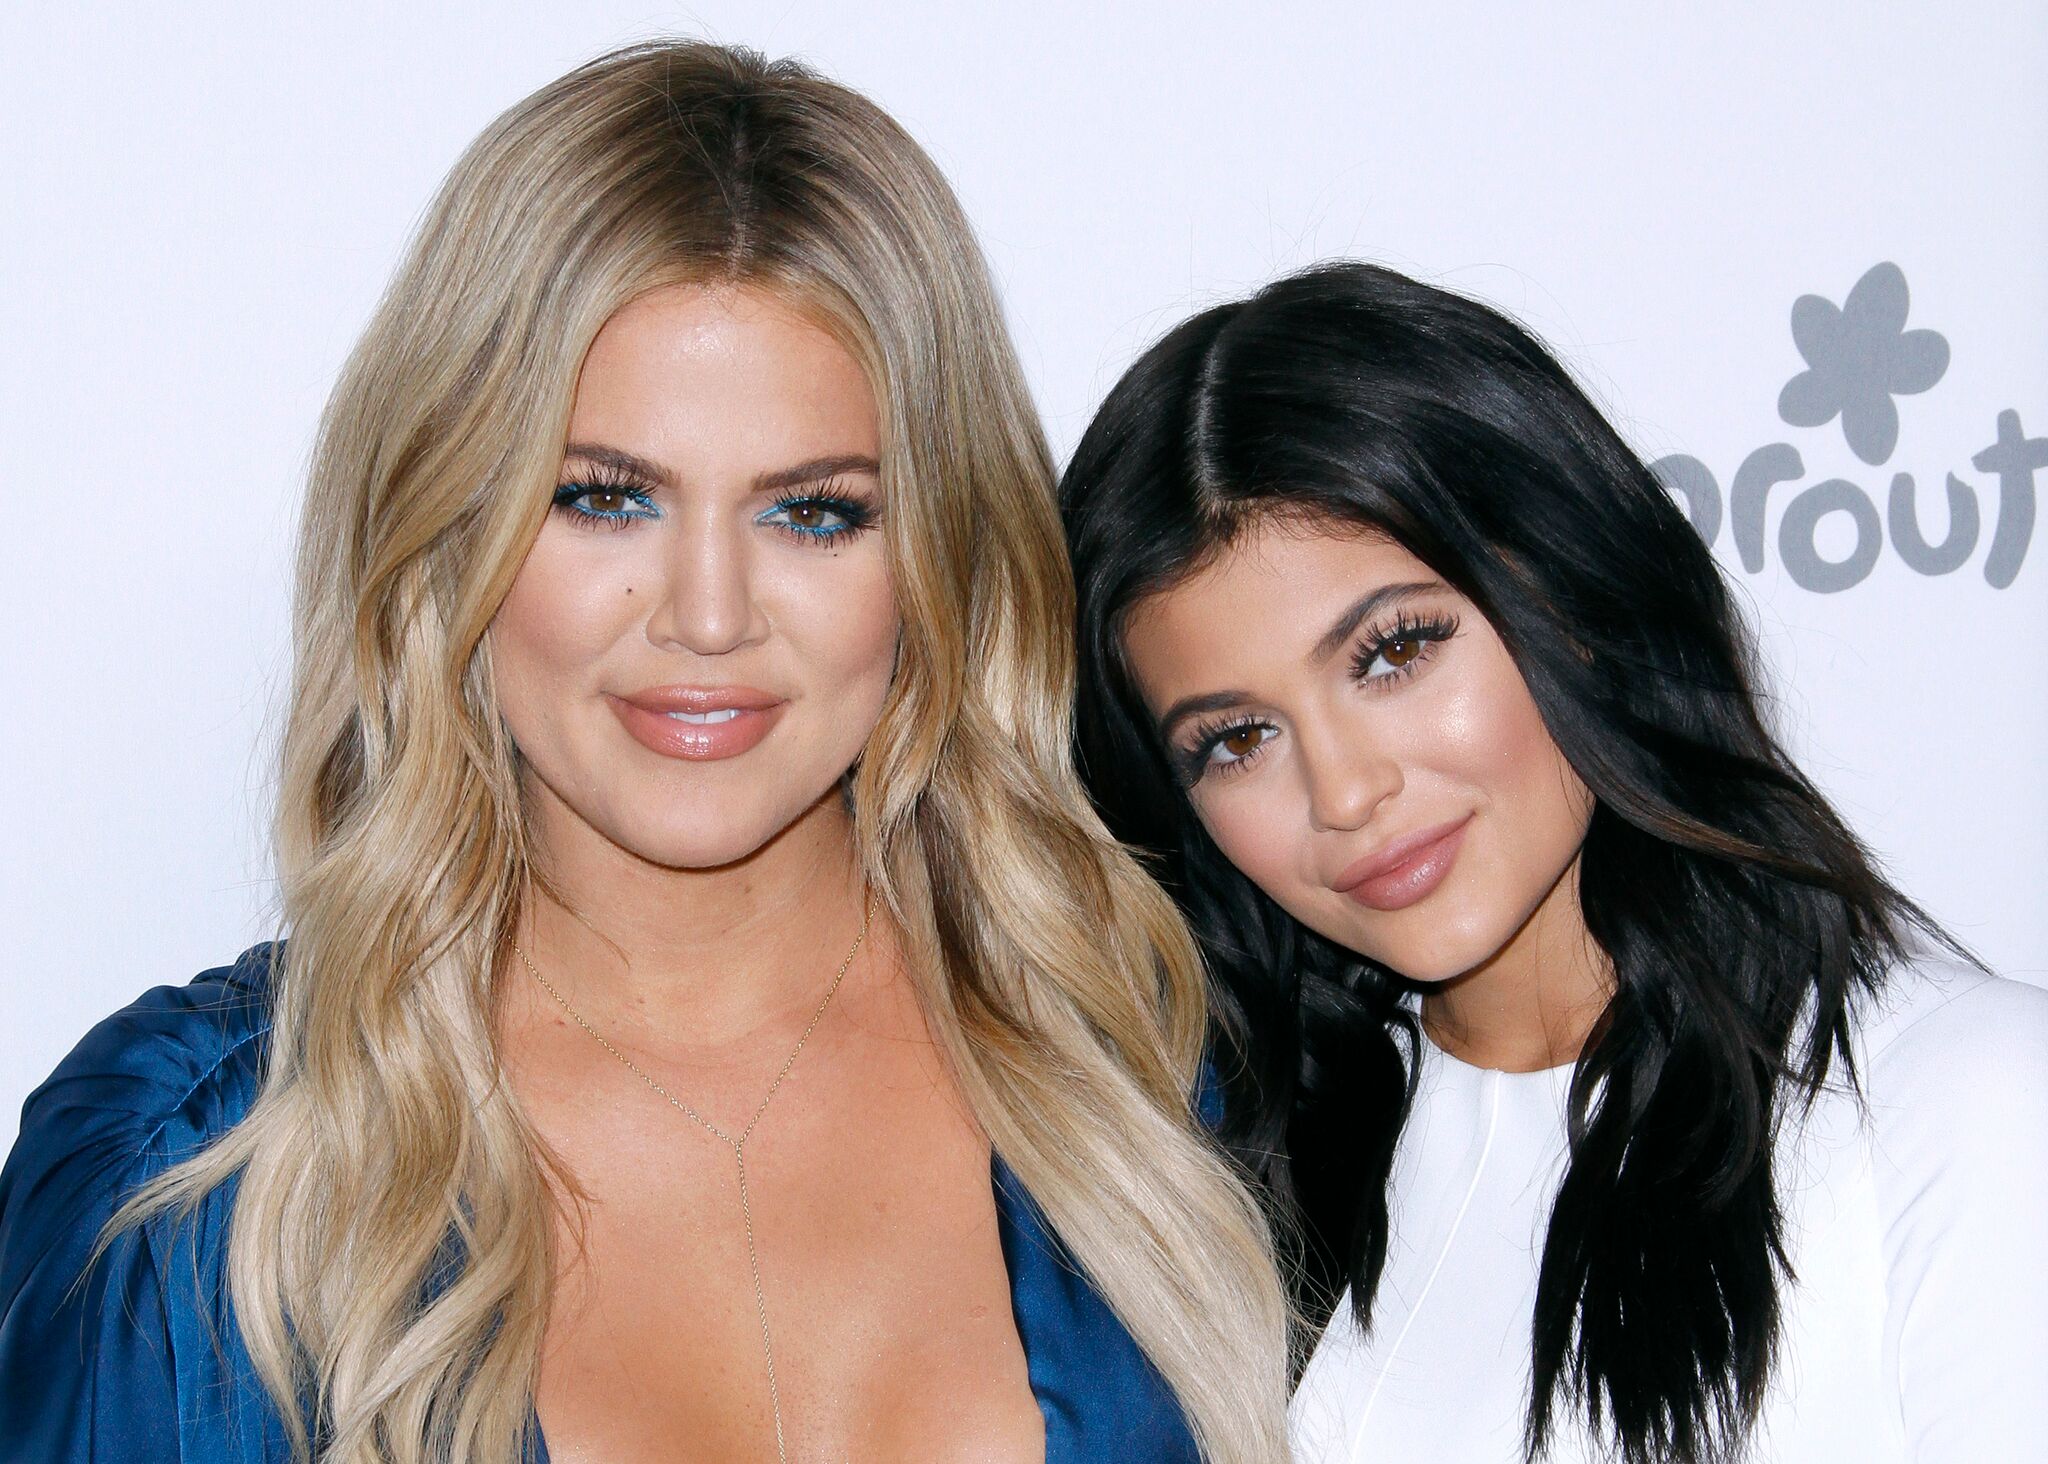 Khloe Kardashian and Kylie Jenner appear during the 2015 NBCUniversal Cable Entertainment Upfront | Getty Images